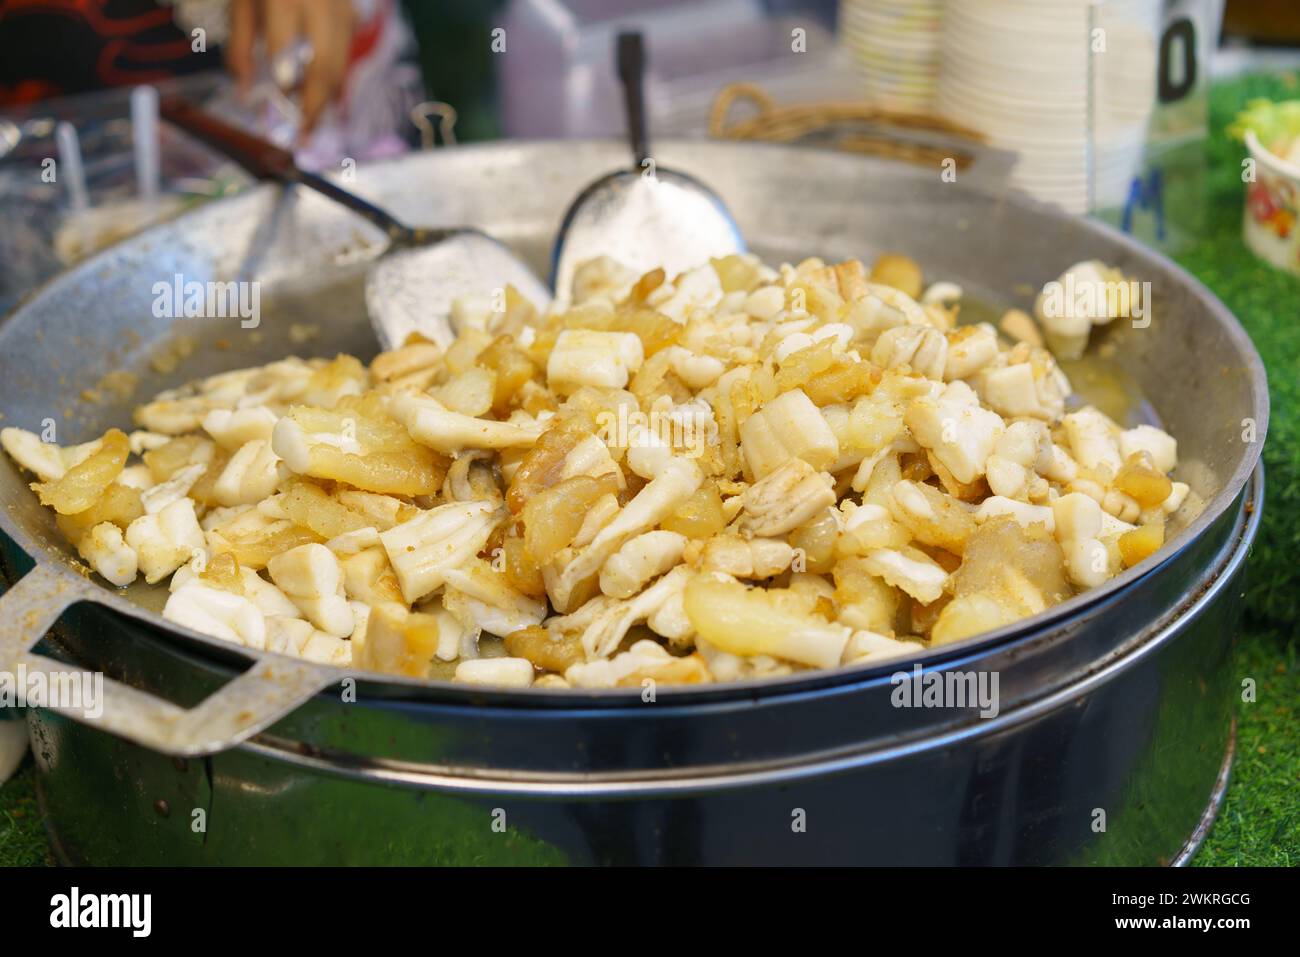 Fresh squid being fried to perfection in a large pan at a bustling street food market, a popular snack among locals and tourists alike Stock Photo